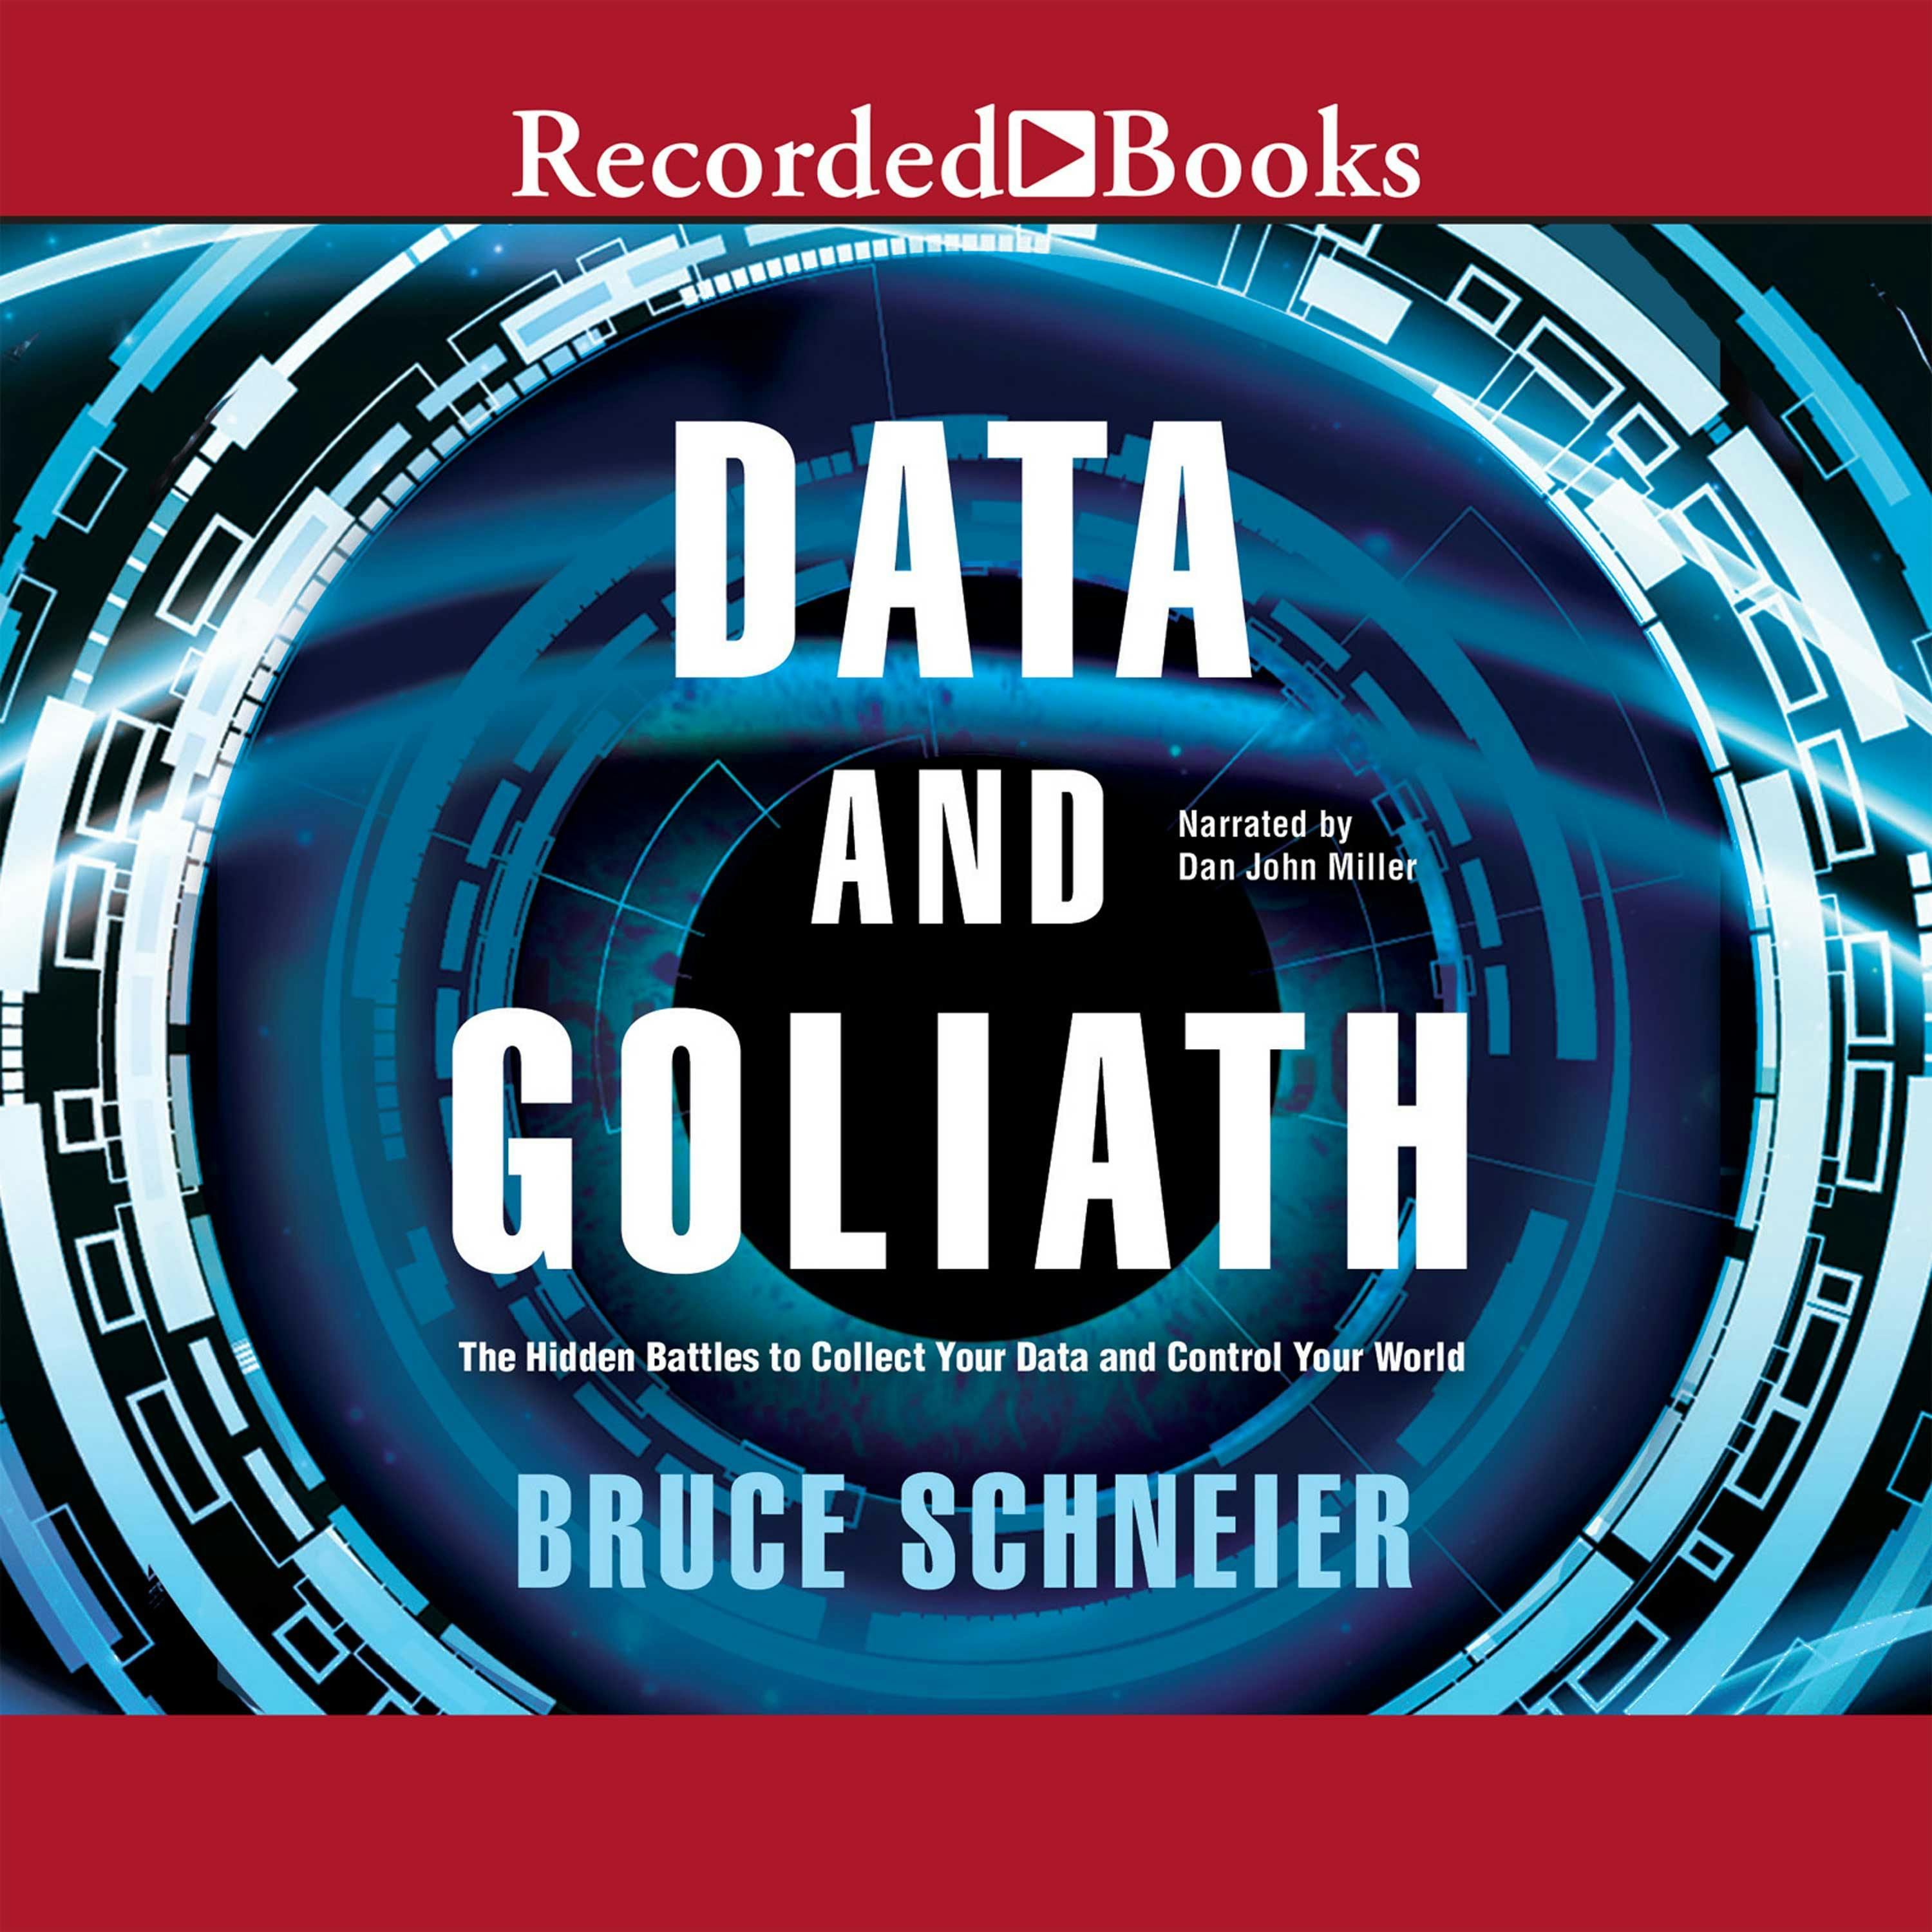 Data and Goliath: The Hidden Battles to Capture Your Data and Control Your World - Bruce Schneier